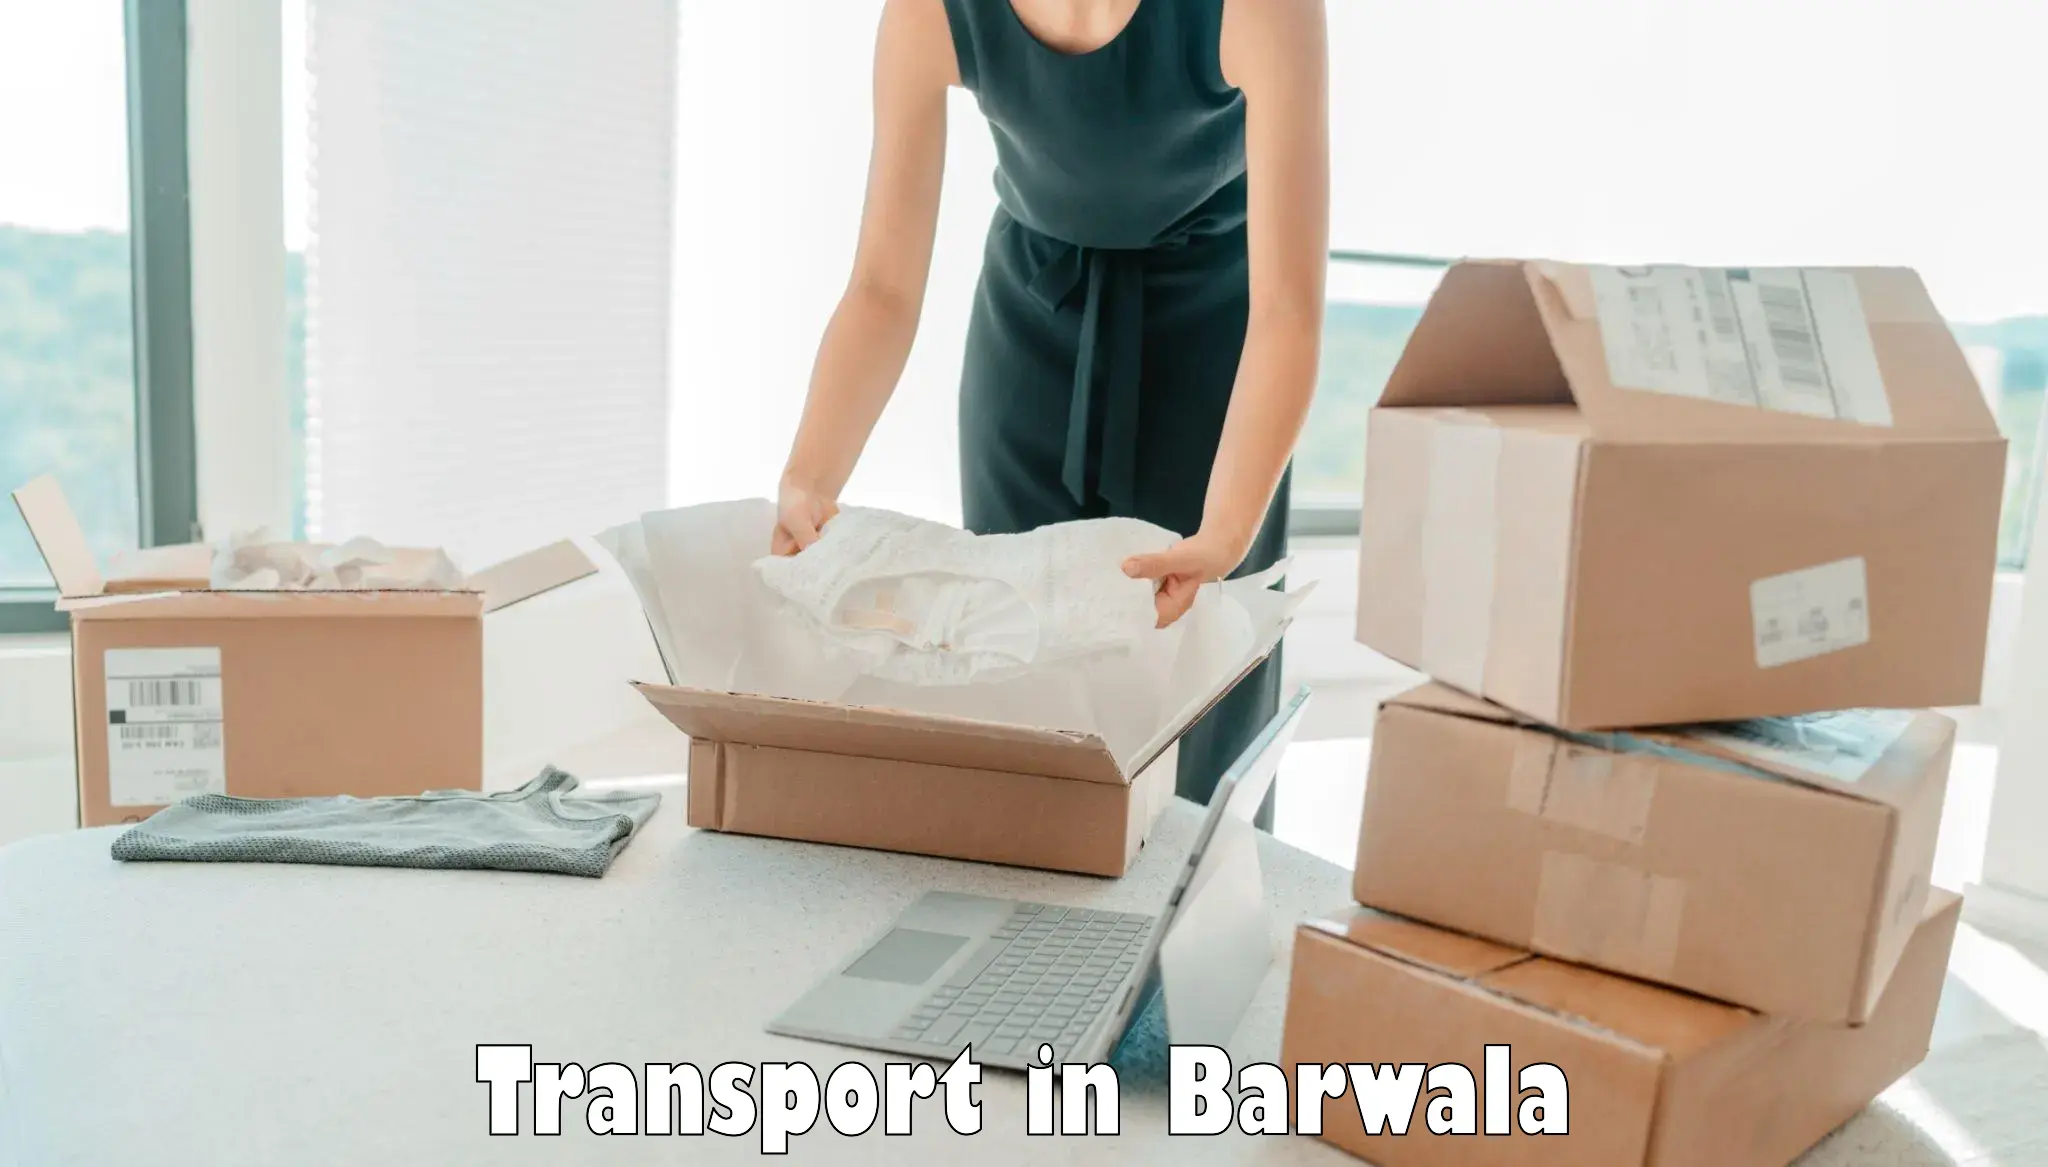 Vehicle transport services in Barwala